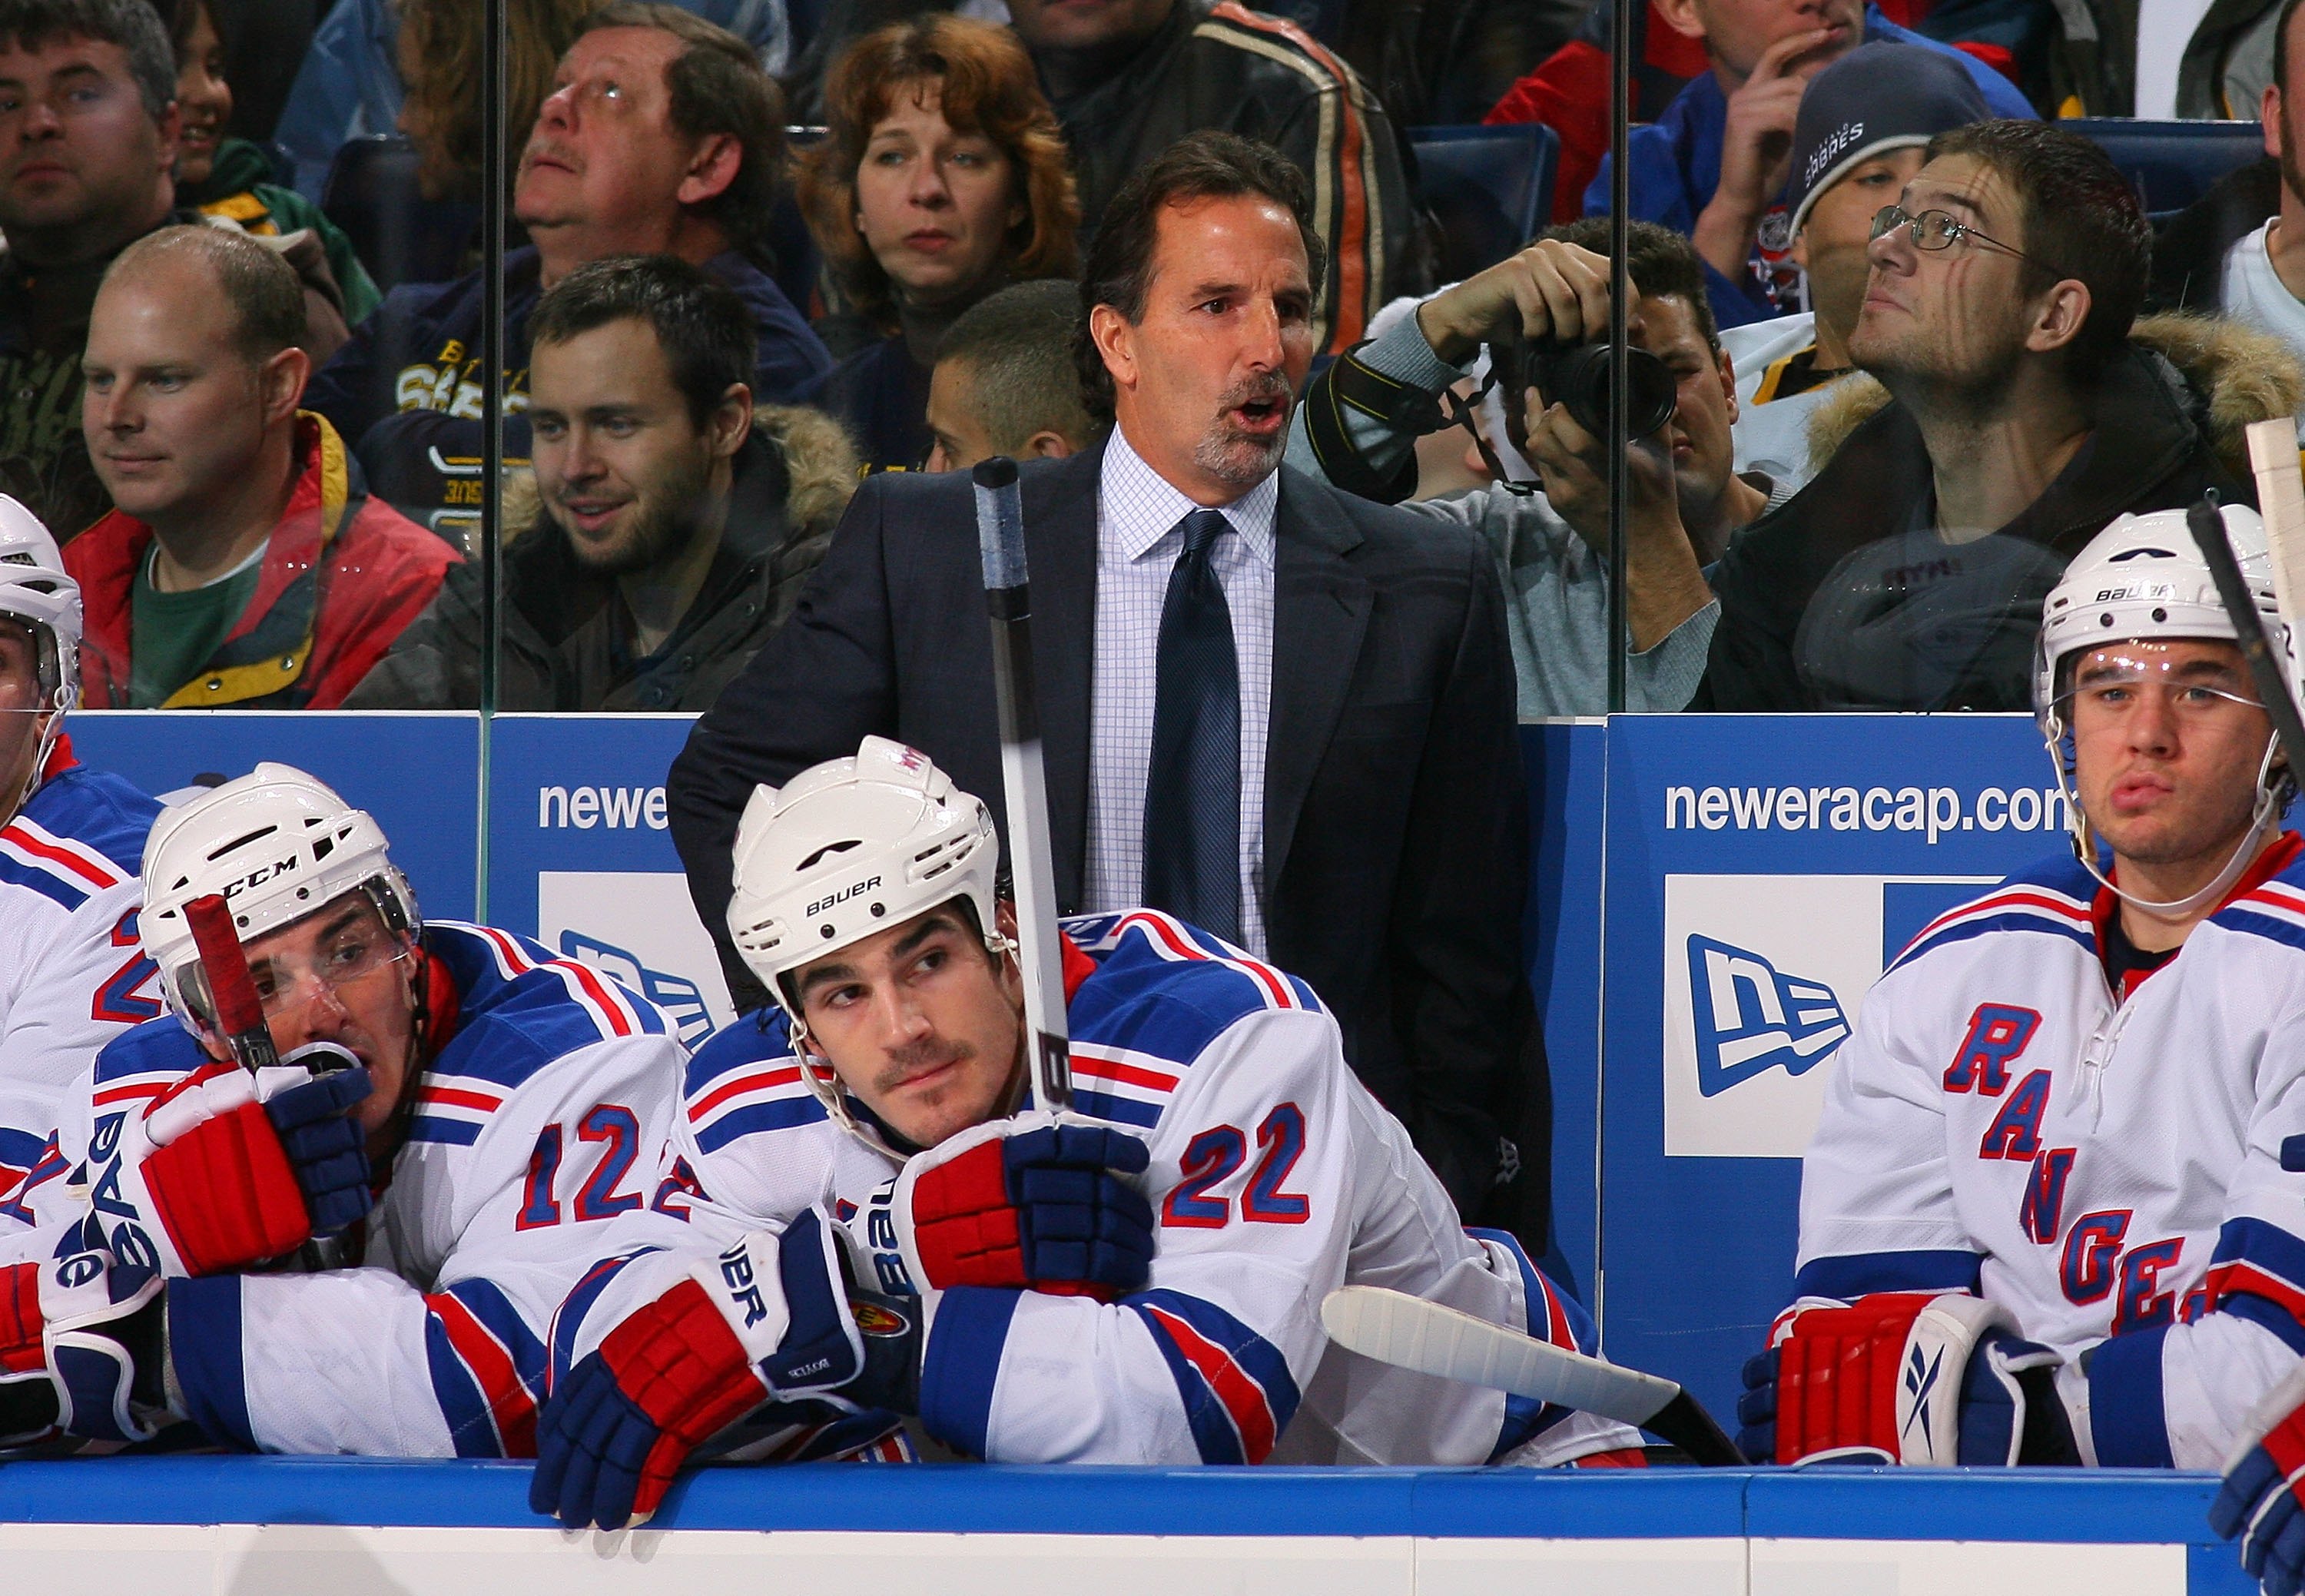 BUFFALO, NY - DECEMBER 05: Head coach John Tortorella and Brian Boyle #22 of the New York Rangers watch the play against the Buffalo Sabres on December 5, 2009 at HSBC Arena in Buffalo, New York. (Photo by Bill Wippert/NHLI via Getty Images)